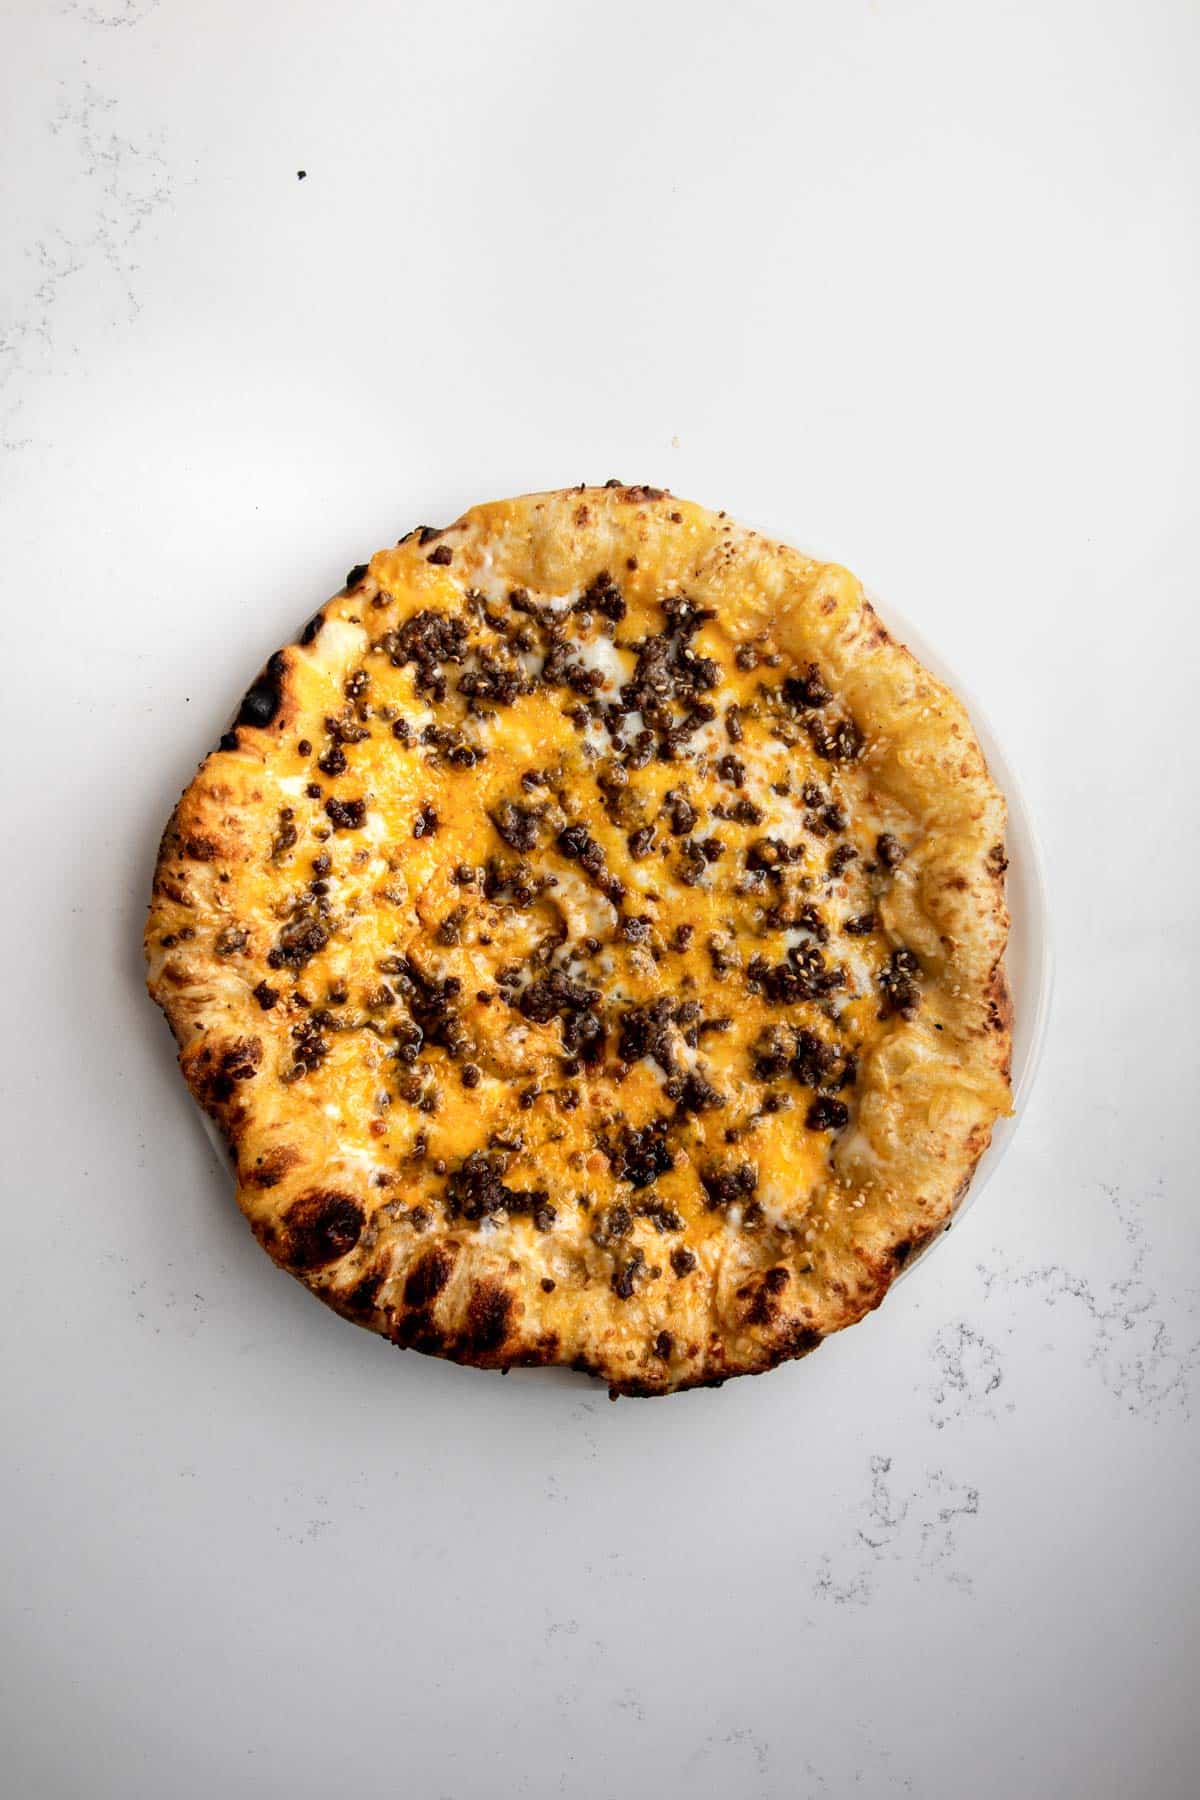 Neapolitan-style Big Mac pizza cooked with melted cheddar and mozzarella cheese and ground beef.